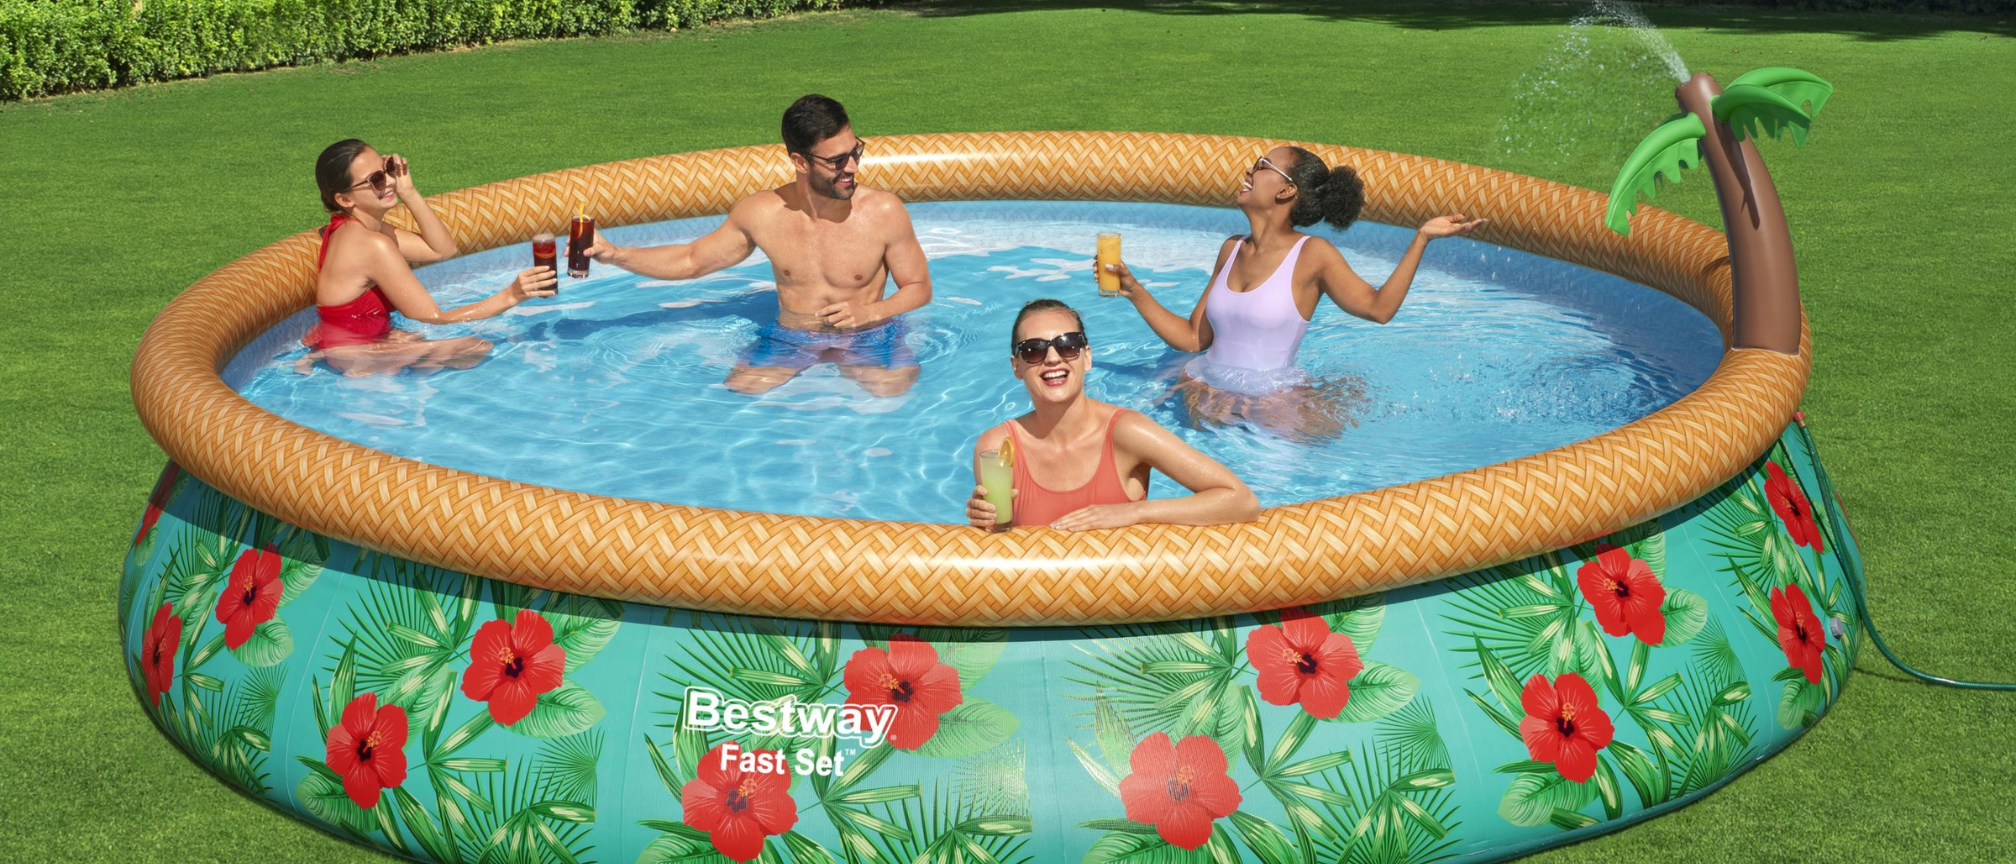 Image of three adults in an inflatable swimming pool